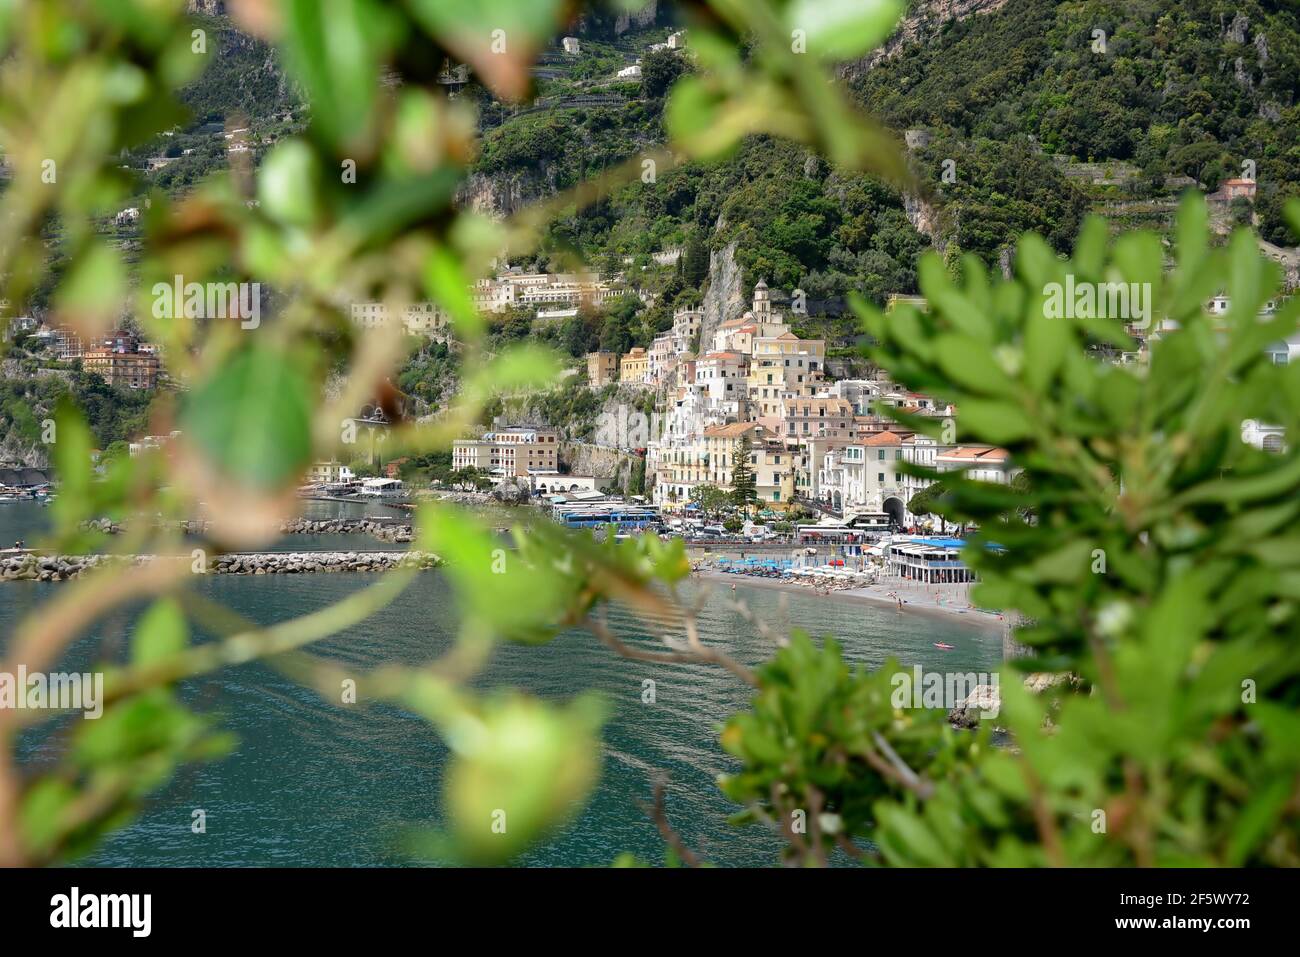 Amalfi is a city in a suggestive natural environment,Between the ninth and eleventh centuries, it was the seat of a powerful maritime republic. Cathed Stock Photo